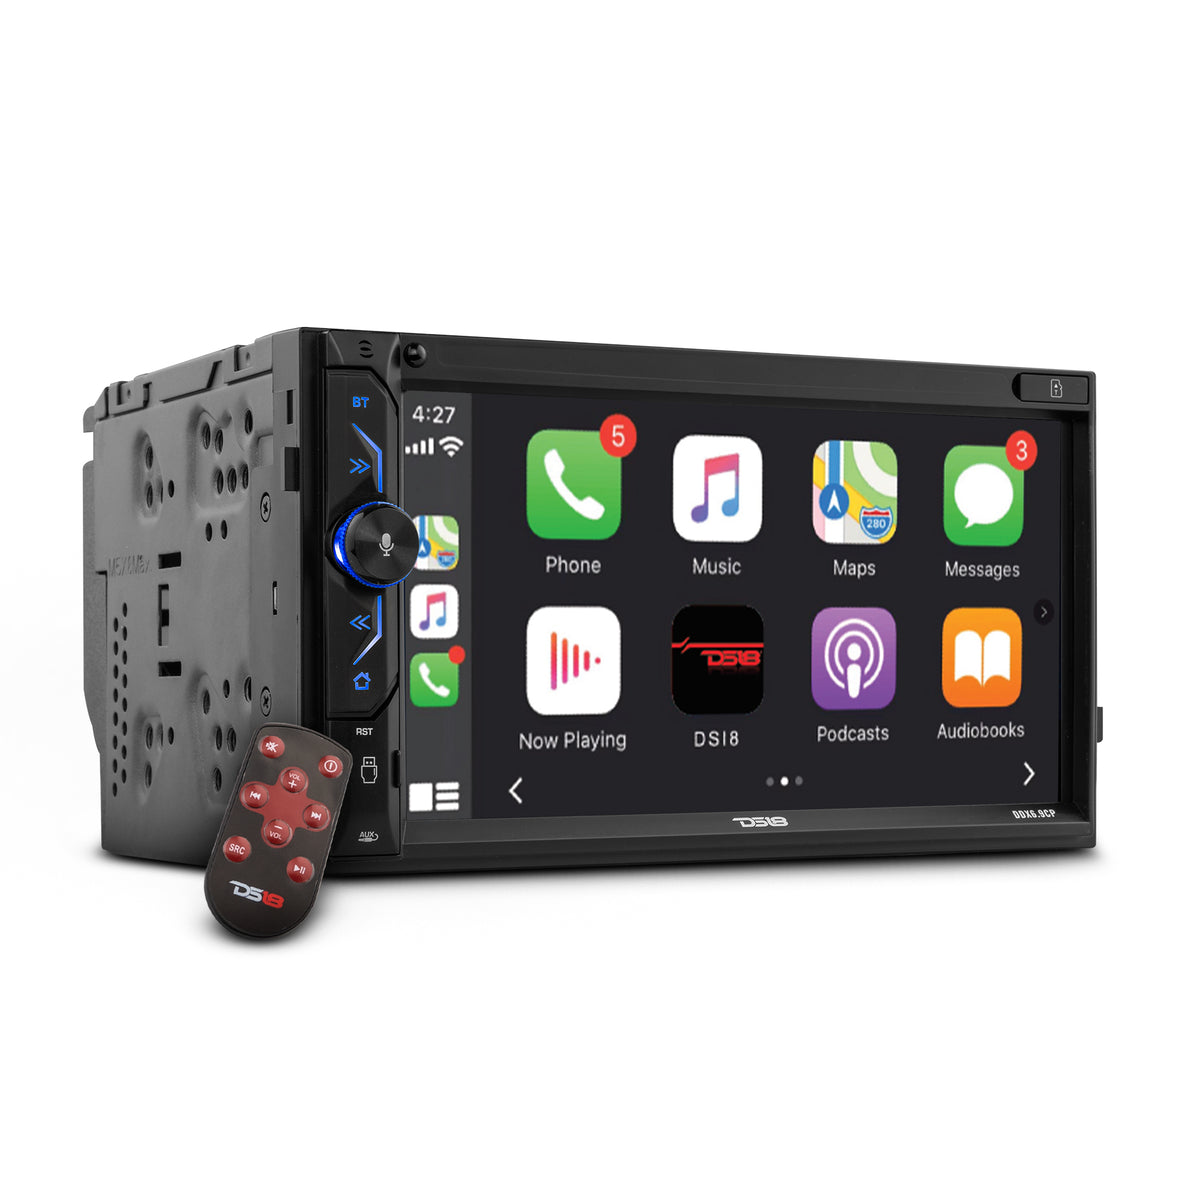  Android Single Din Car Stereo with Bluetooth,6.9